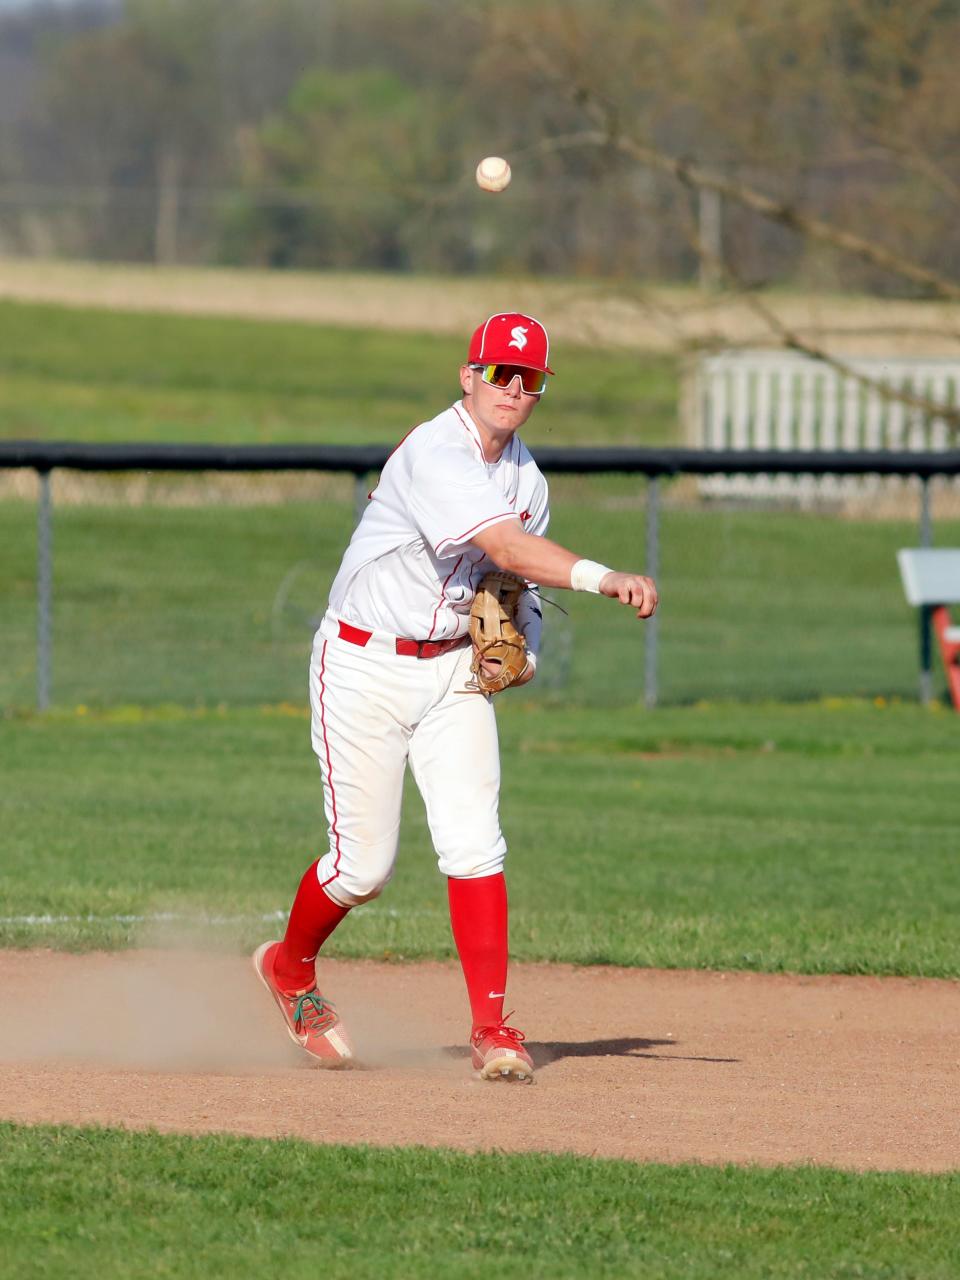 Ben Fox throws out a runner at first base during Sheridan's 8-1 win against visiting Philo on April 16 in Thornville. Sheridan earned the No. 3 seed in Sunday's Division II Southeast District sectional tournament drawing.